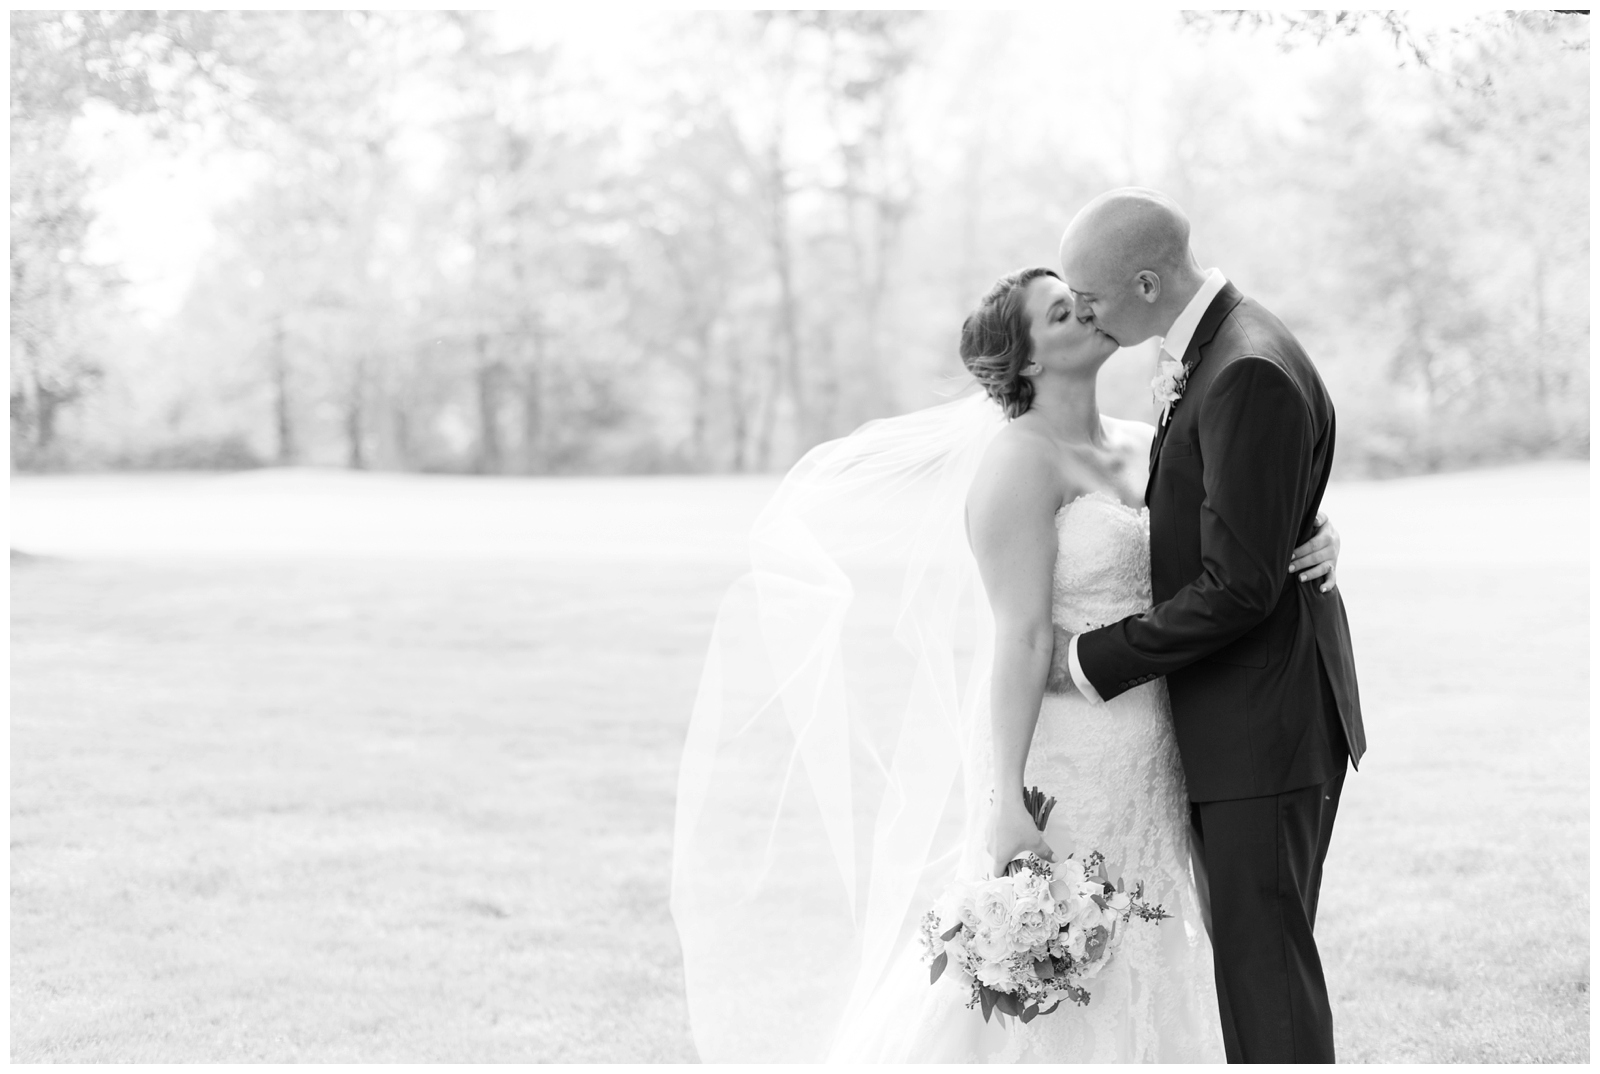 black and white portrait of bride and groom kissing while bride's veil blows in the wind